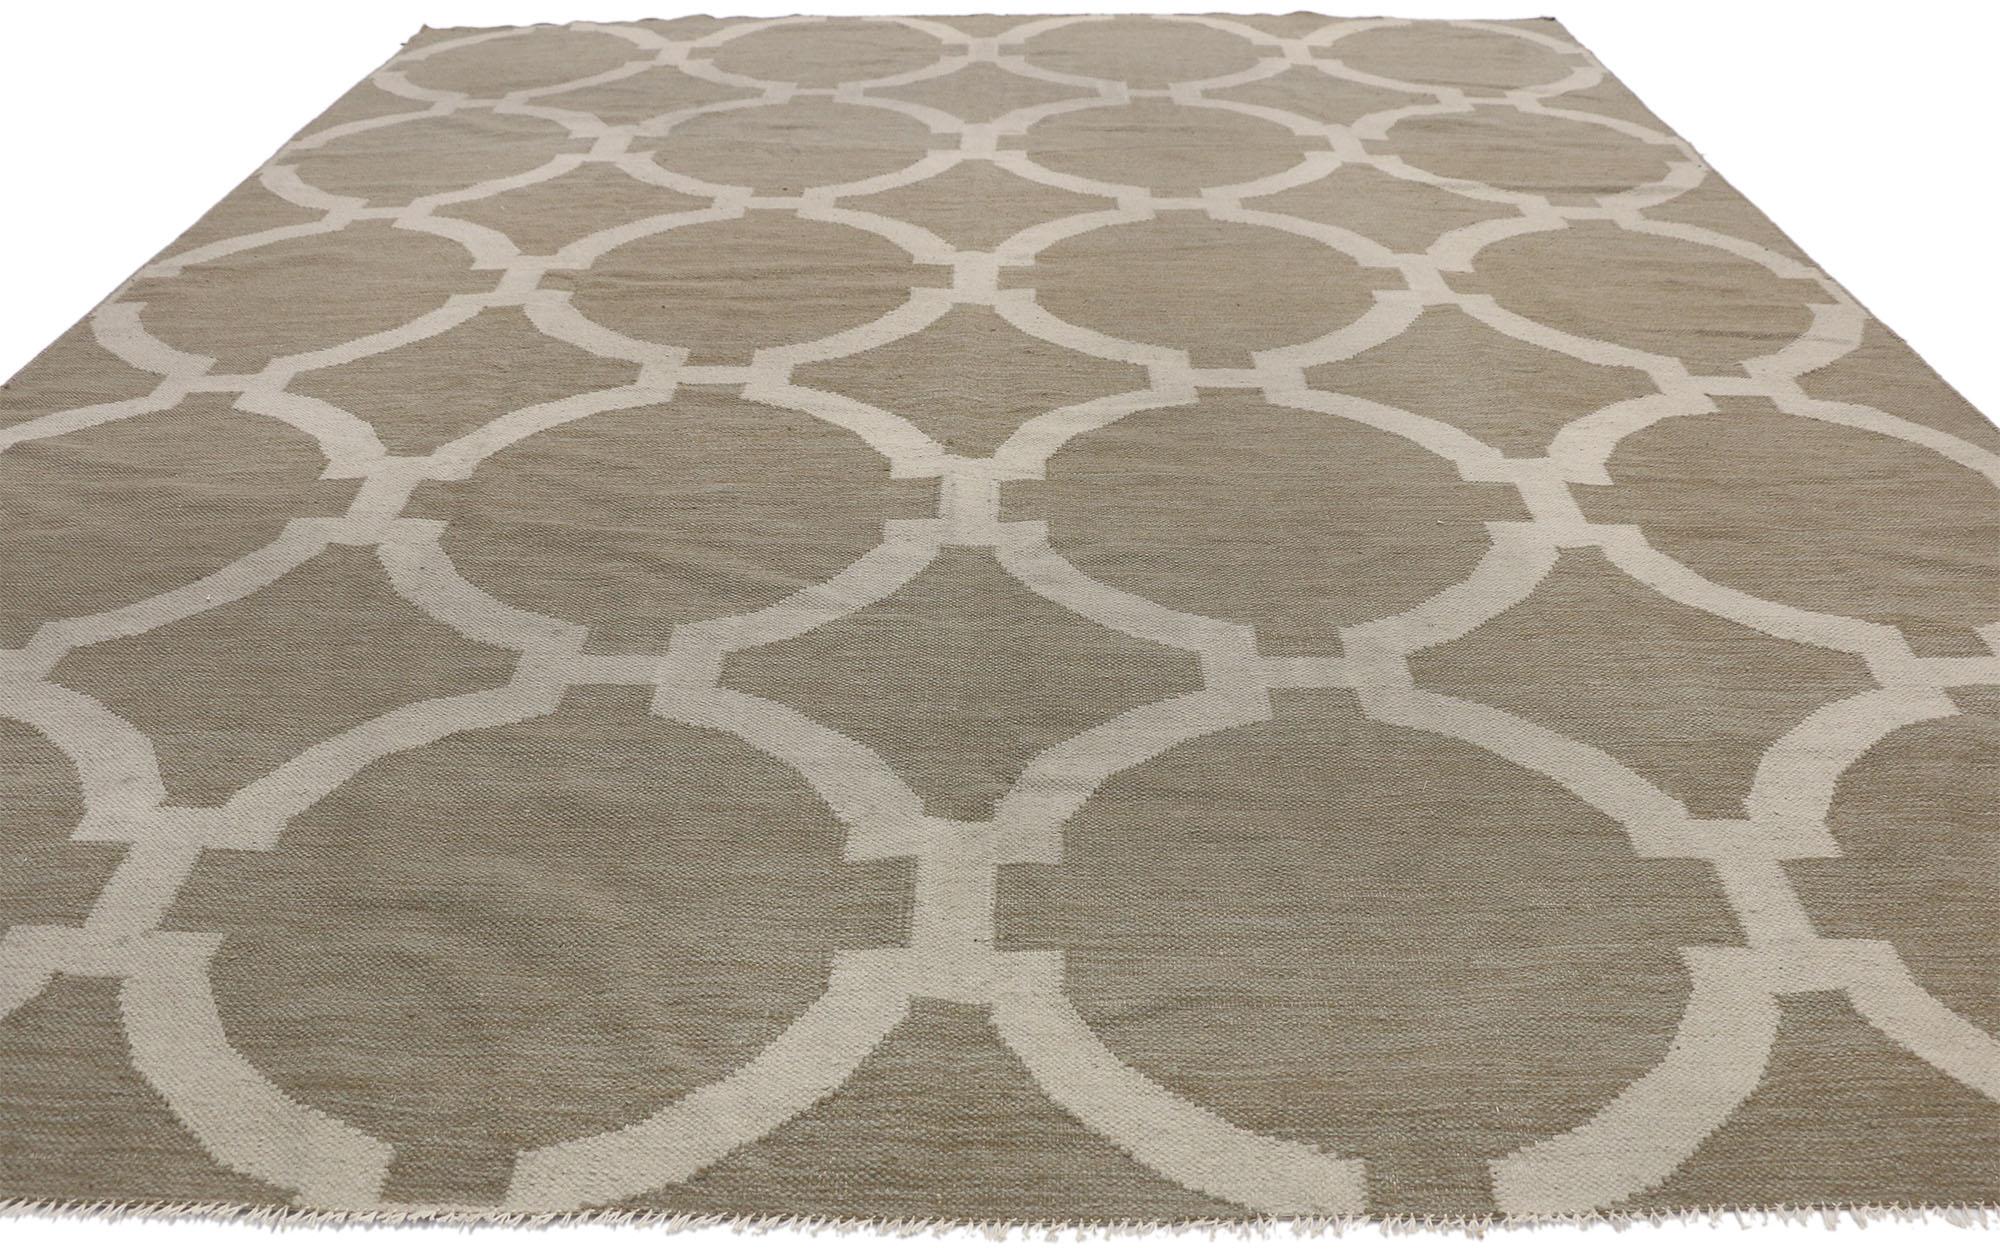 Indian Vintage Kilim Circle Trellis Rug with Geometric Pattern and Transitional Style For Sale